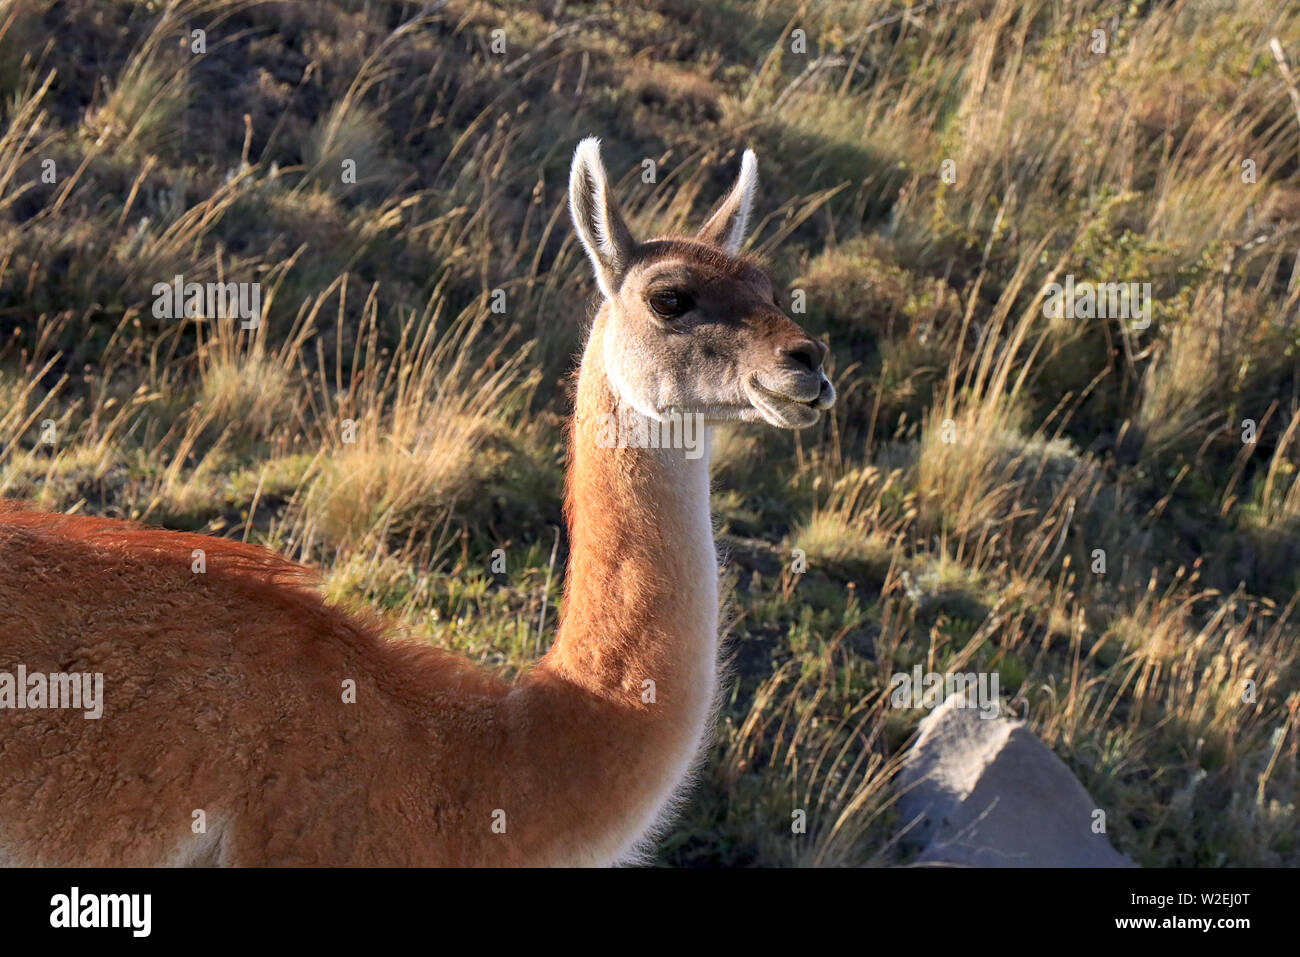 Wild Guanaco (Lama guanicoe) in the desolate grasslands of the Torres del Paine National Park in Southern Chile Stock Photo